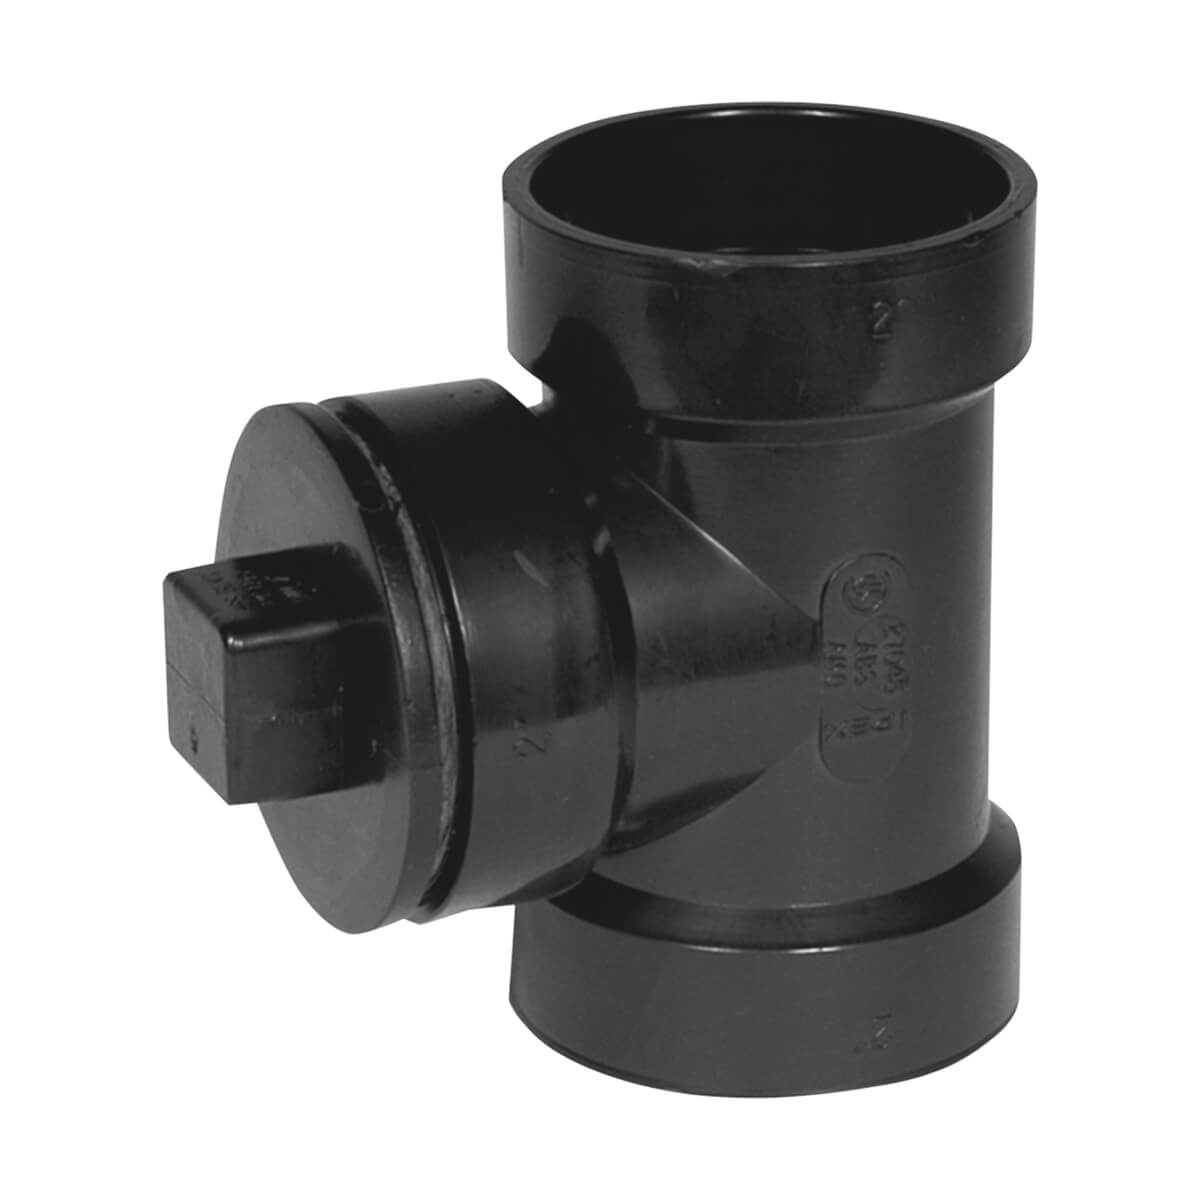 ABS-DWV Cleanout Tee - with plug - Hub - 3-in